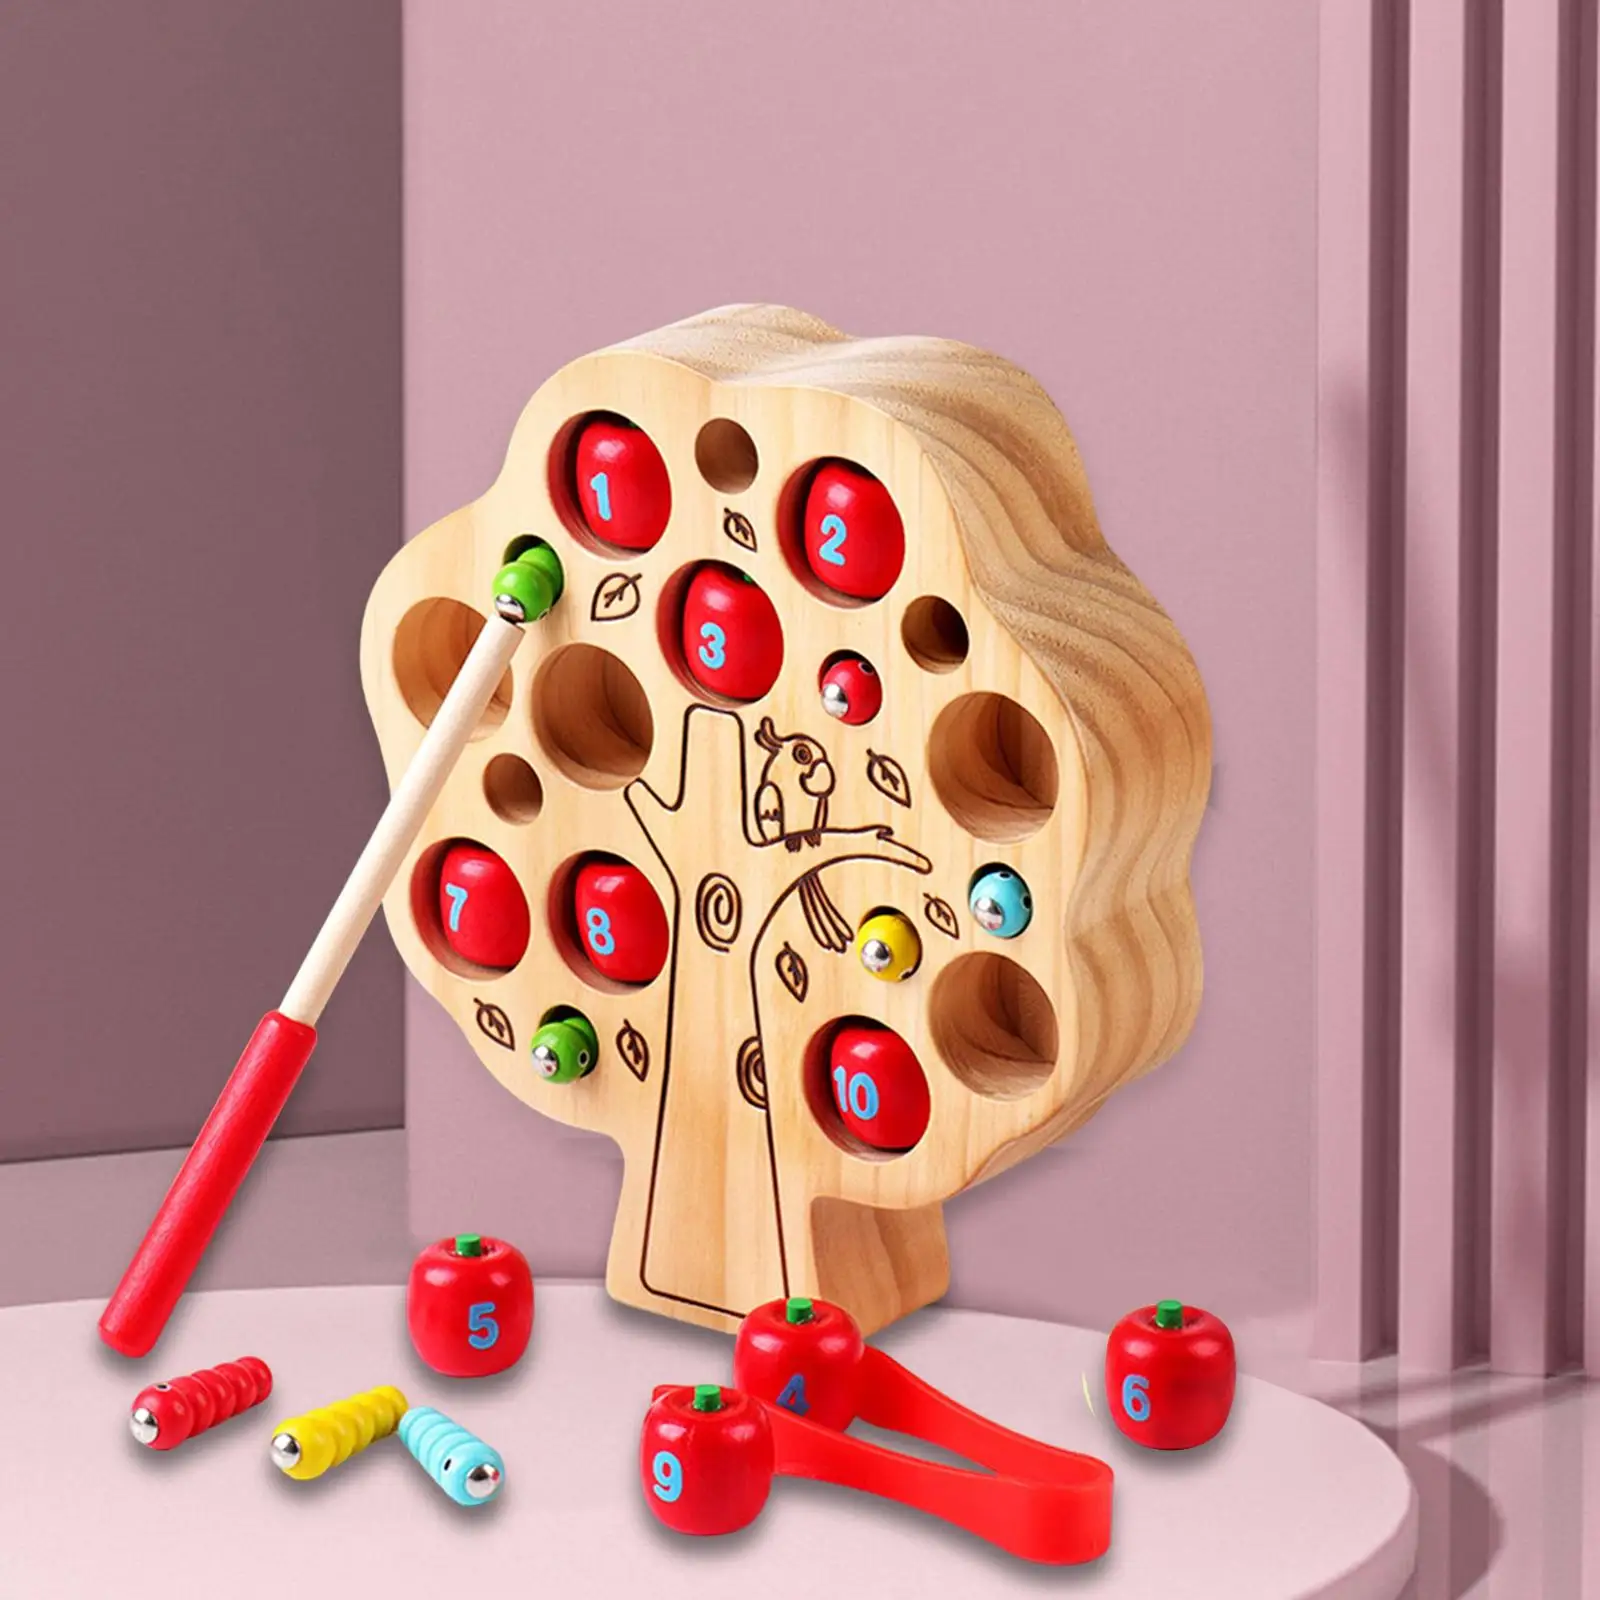 Wooden Game Toy Catching Worm Educational Toys Early Learning Preschool Training Development Wood Montessori for Toddler Kids